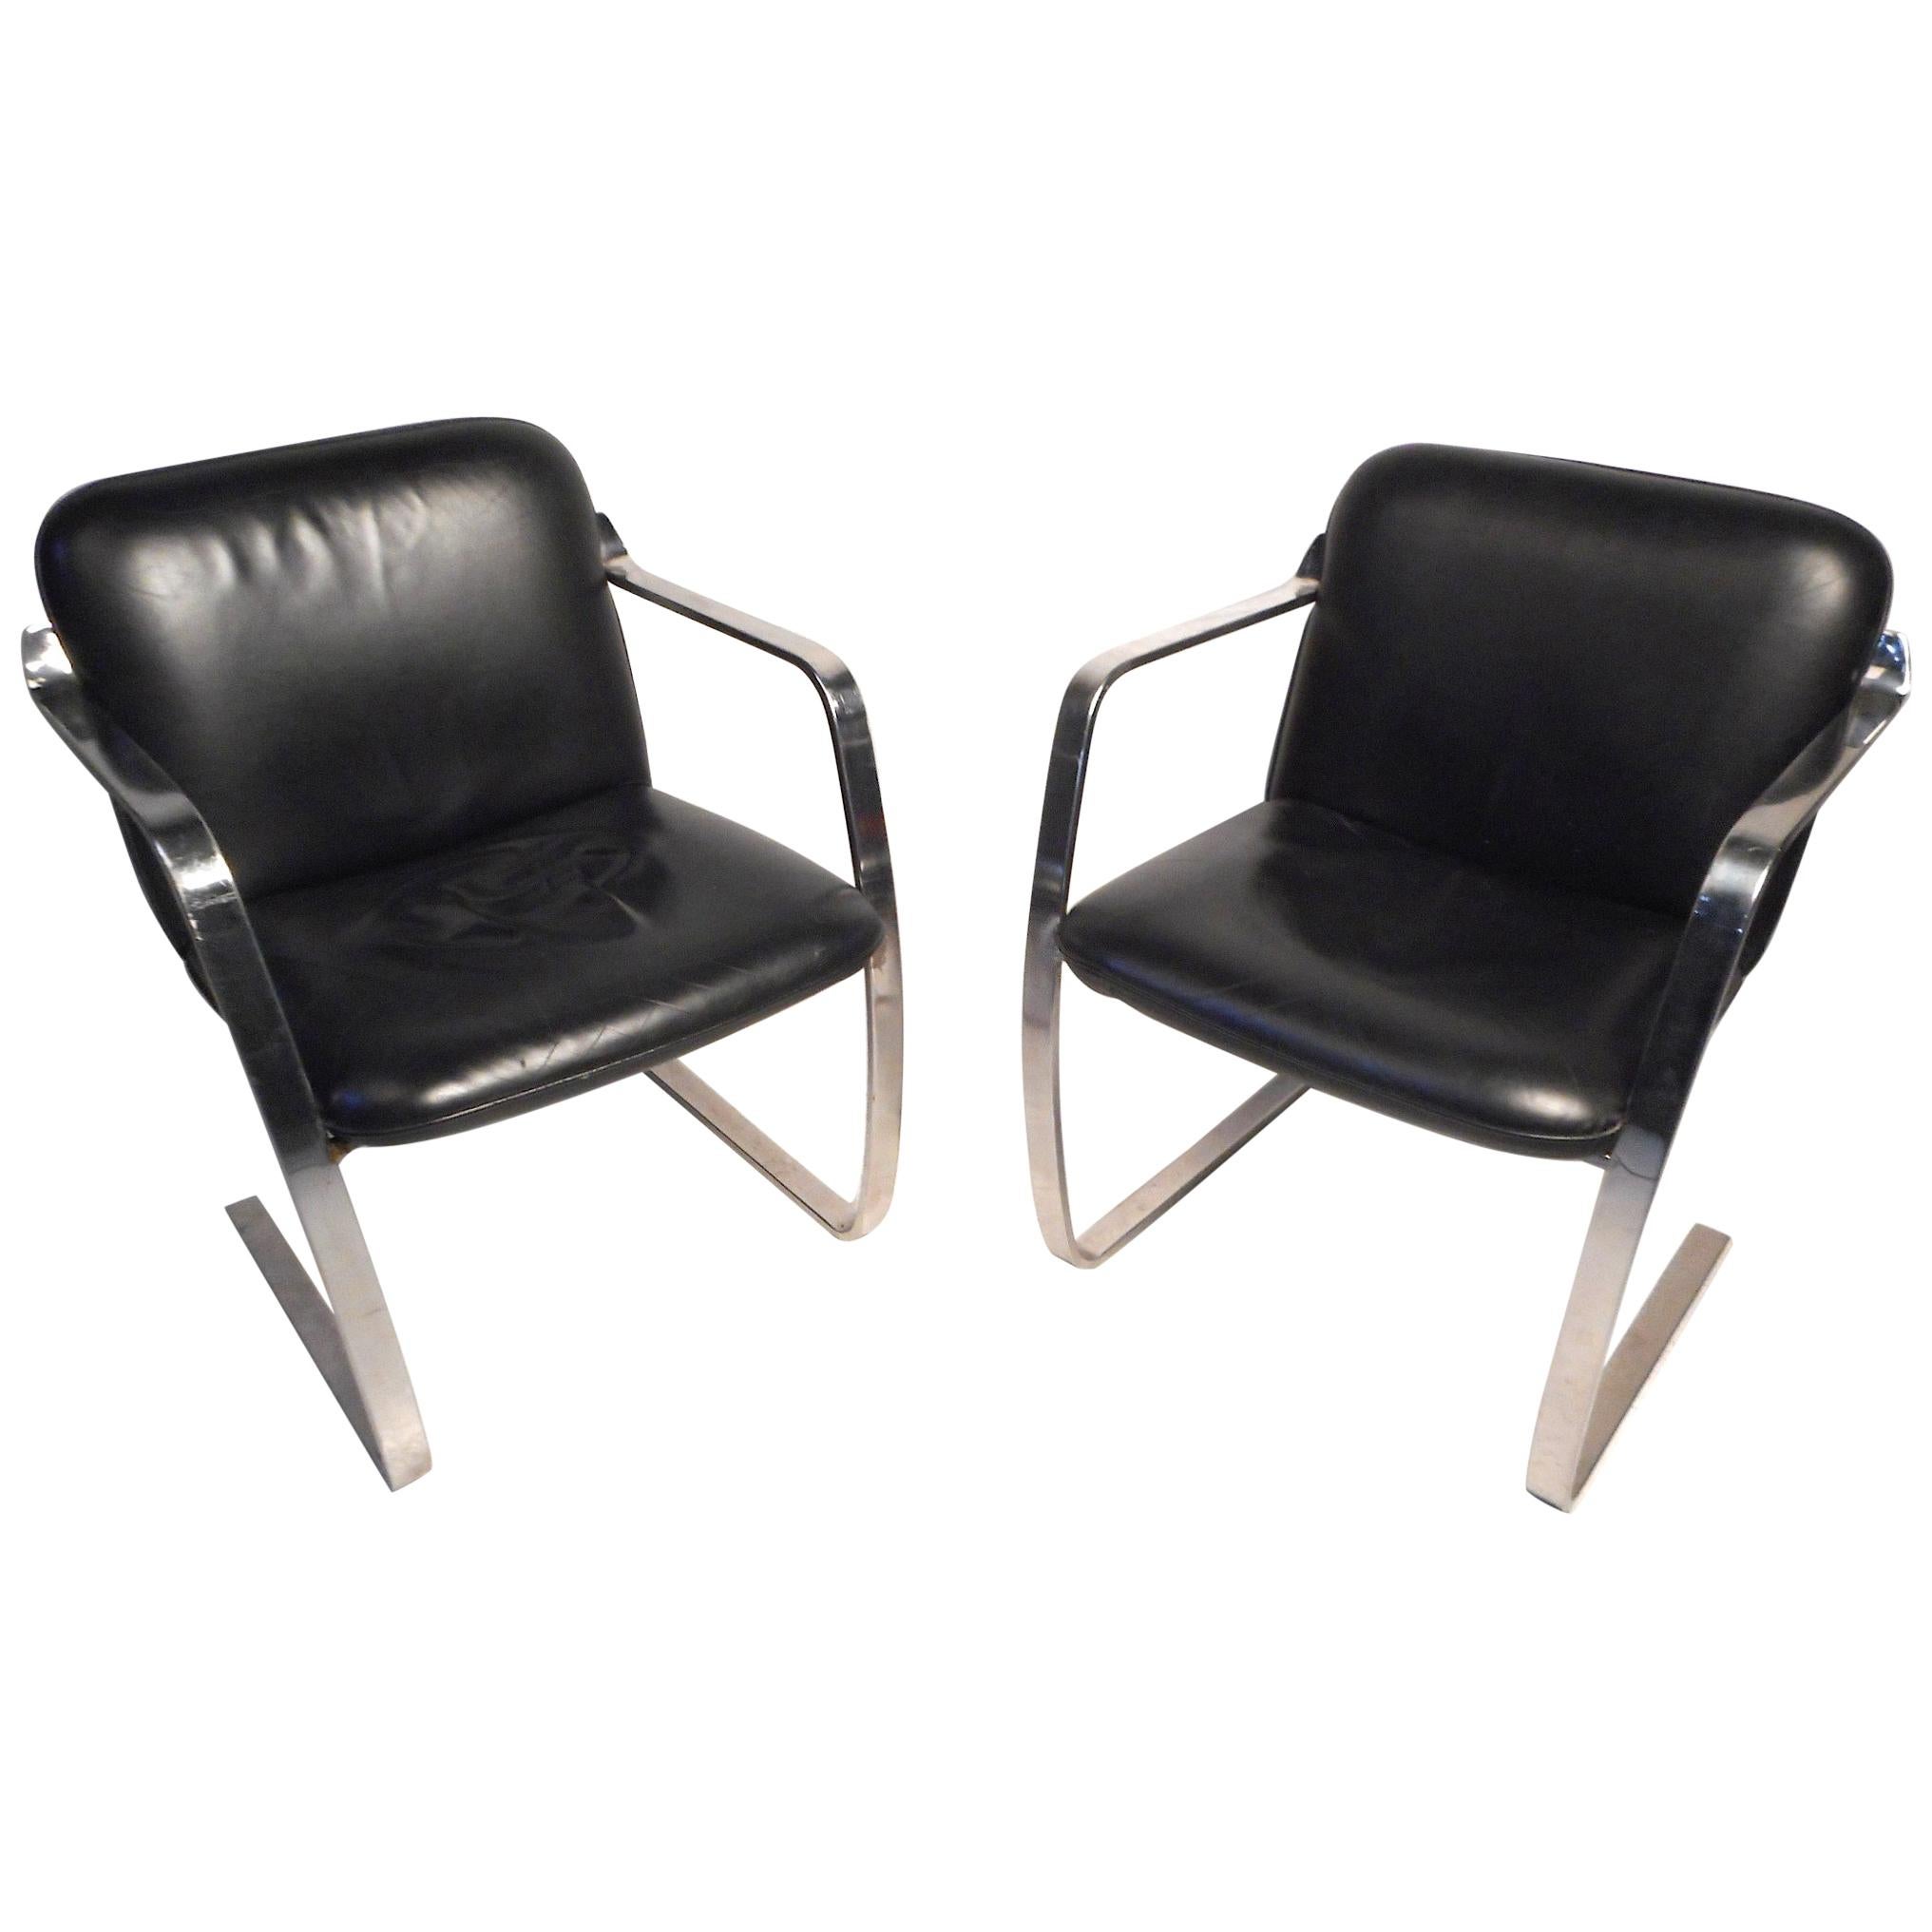 Pair of Midcentury Cantilever Brno Style Chairs by Cumberland Furniture